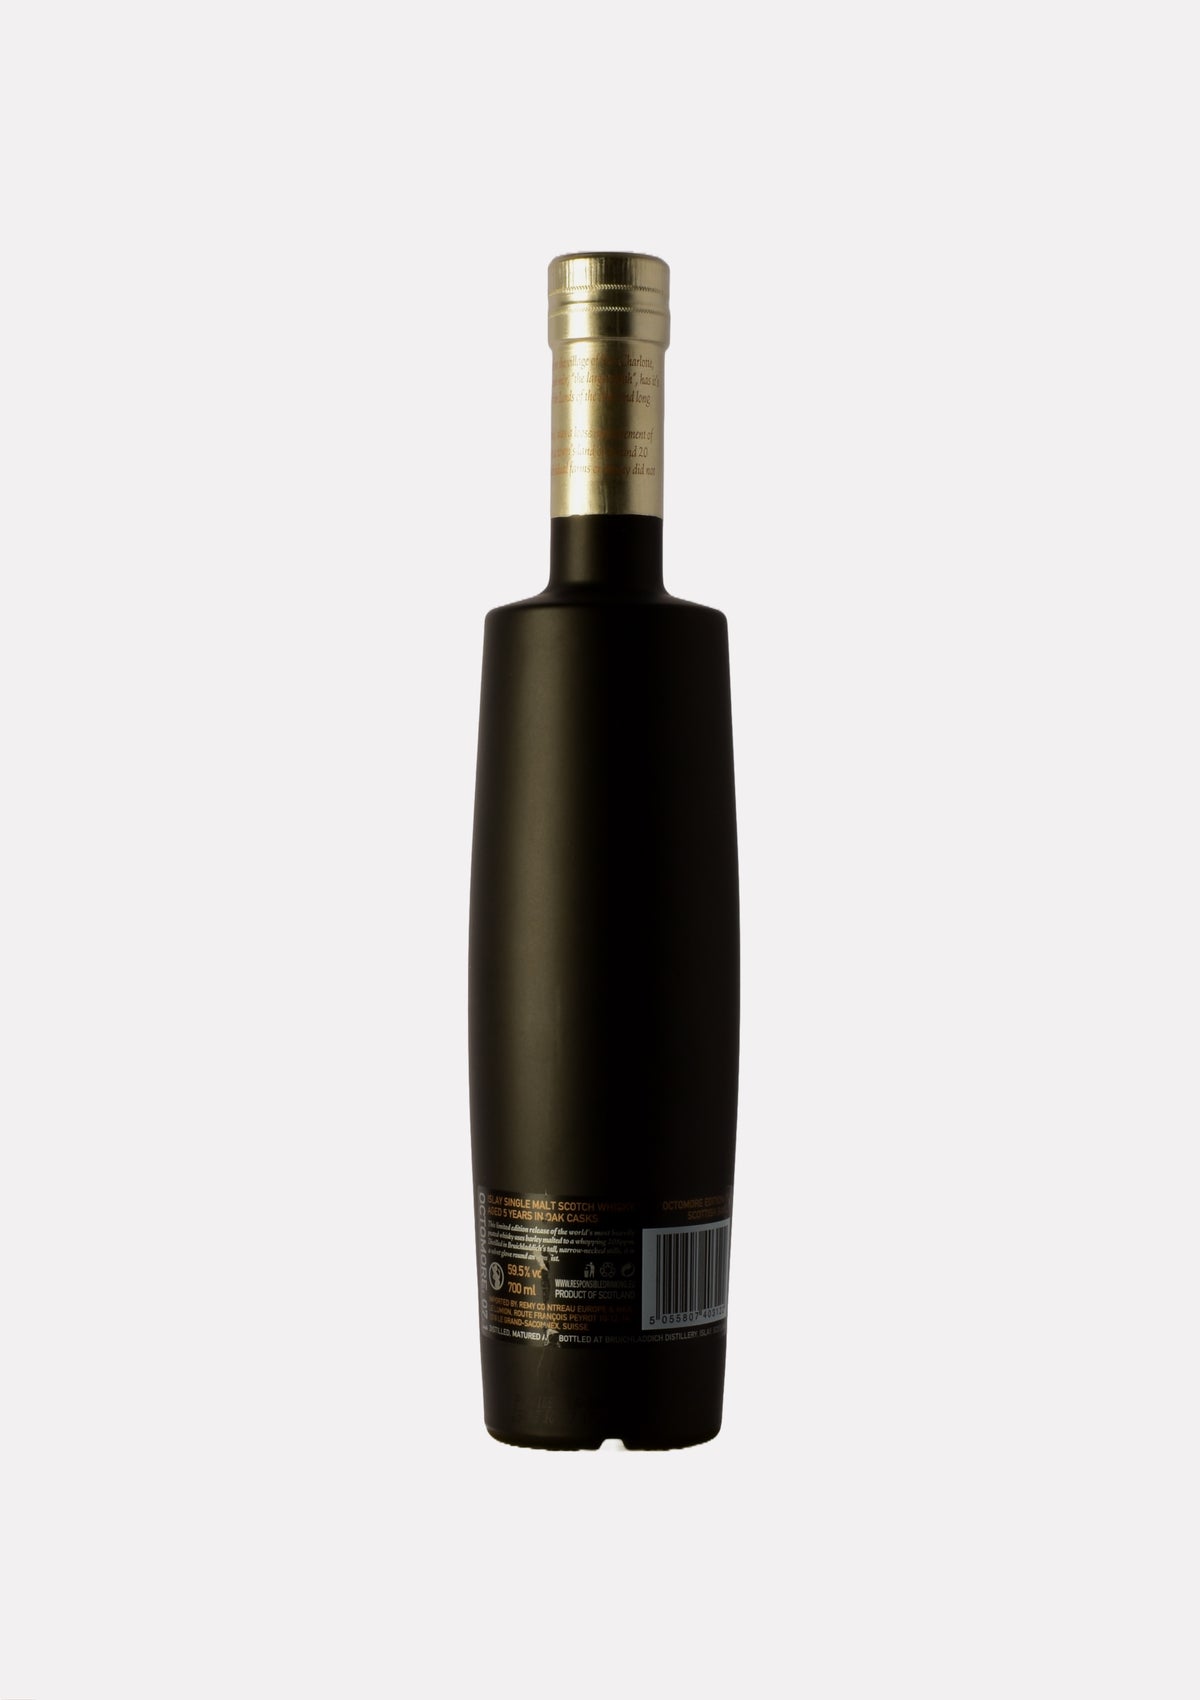 Octomore 07.1 208 ppm